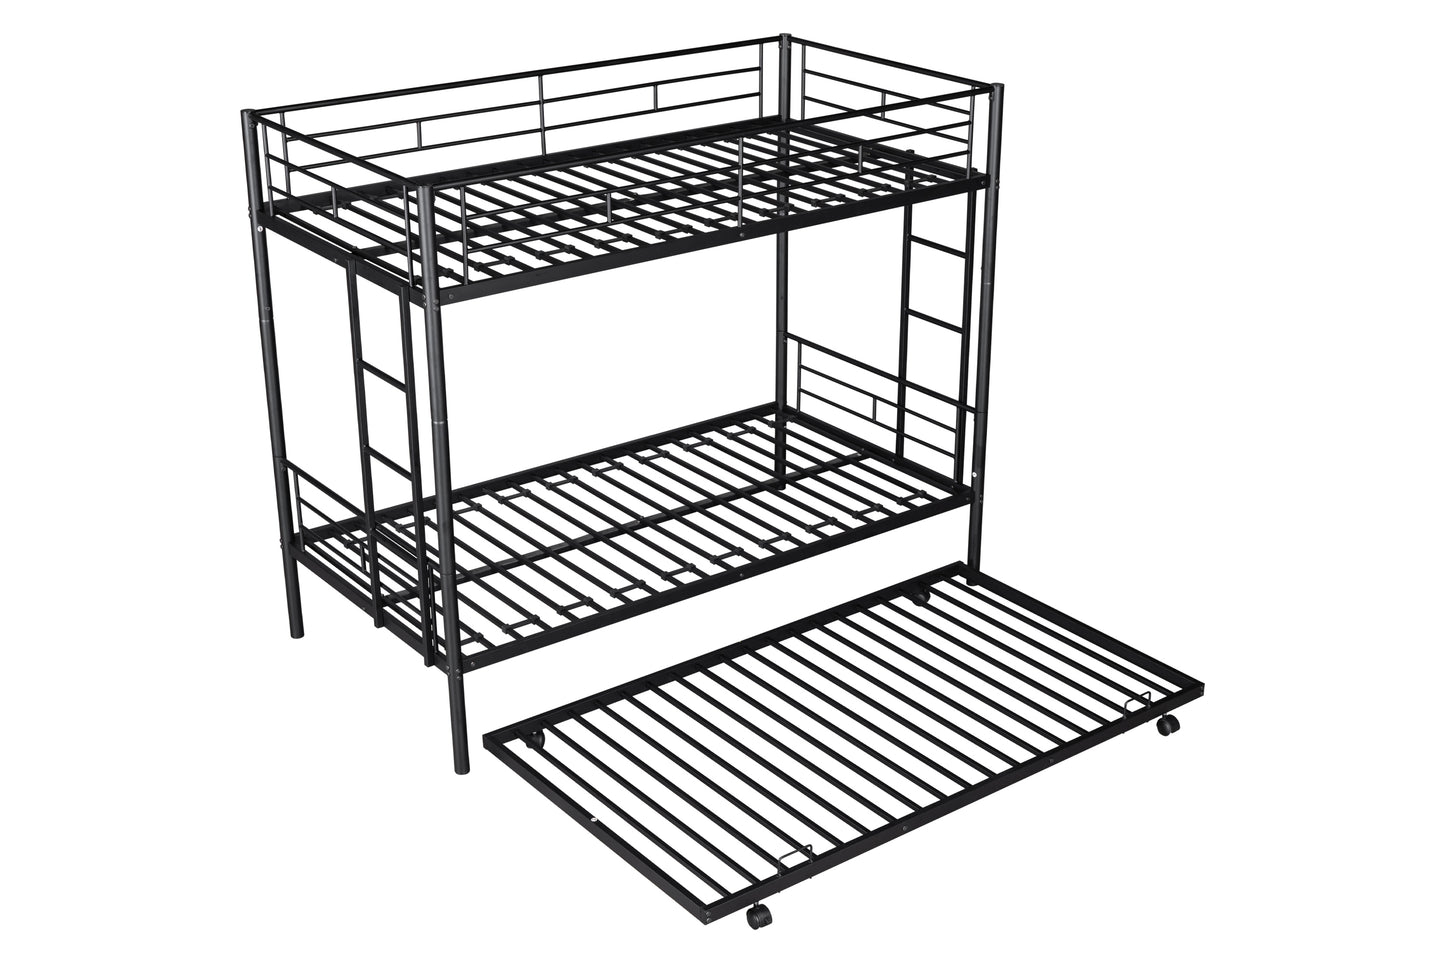 Metal Twin over Twin Bunk Bed with Trundle/Can Be Separated into 2 Twin Beds/ Heavy-duty Sturdy Metal/ Noise Reduced/ Safety Guardrail/ Trundle for Flexible Space/ Bunk Bed for Three/ CPC Certified